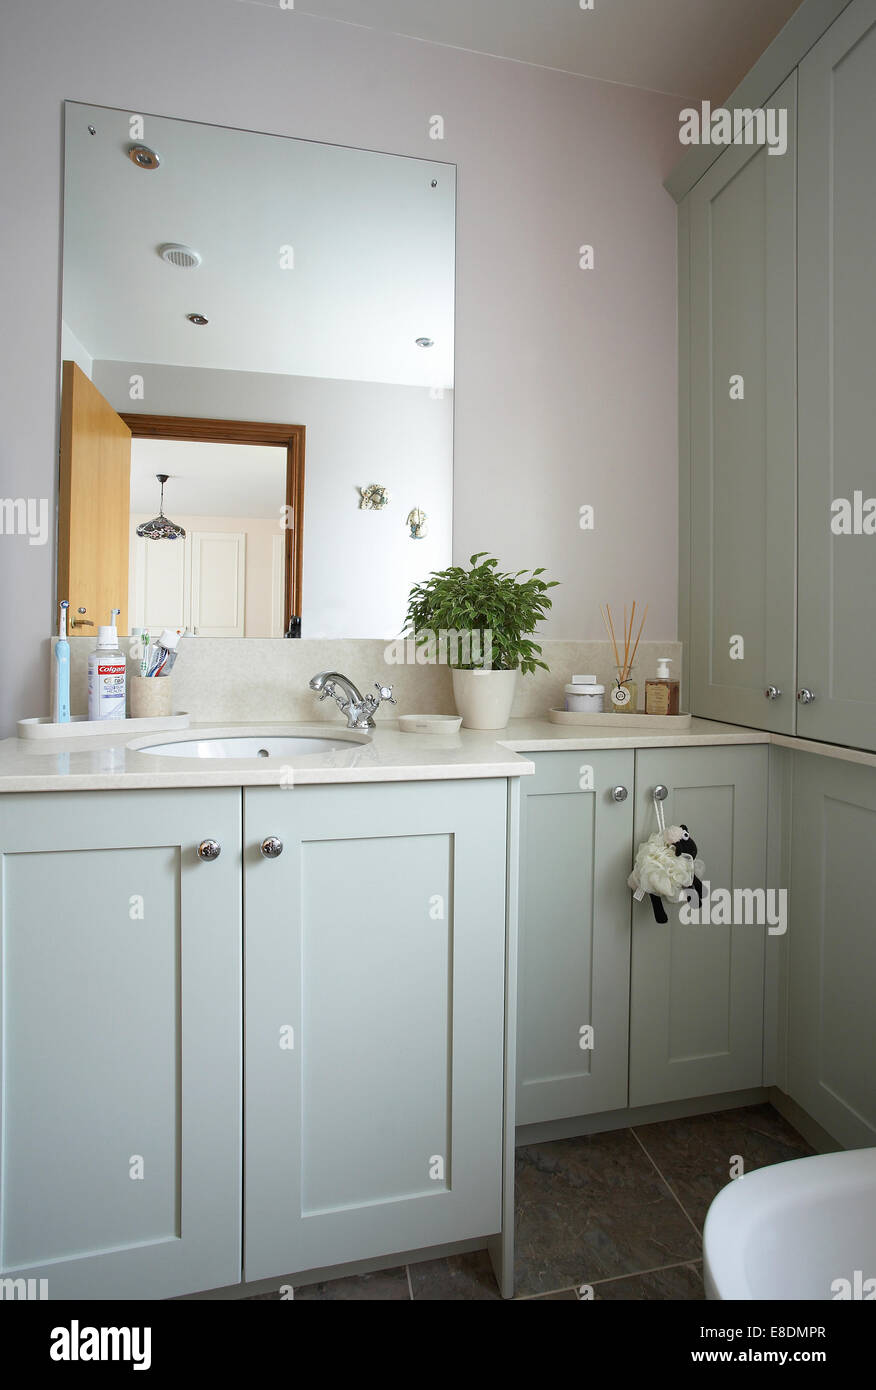 Bathroom interior in a home in the UK in a pastel blue - green color. Stock Photo